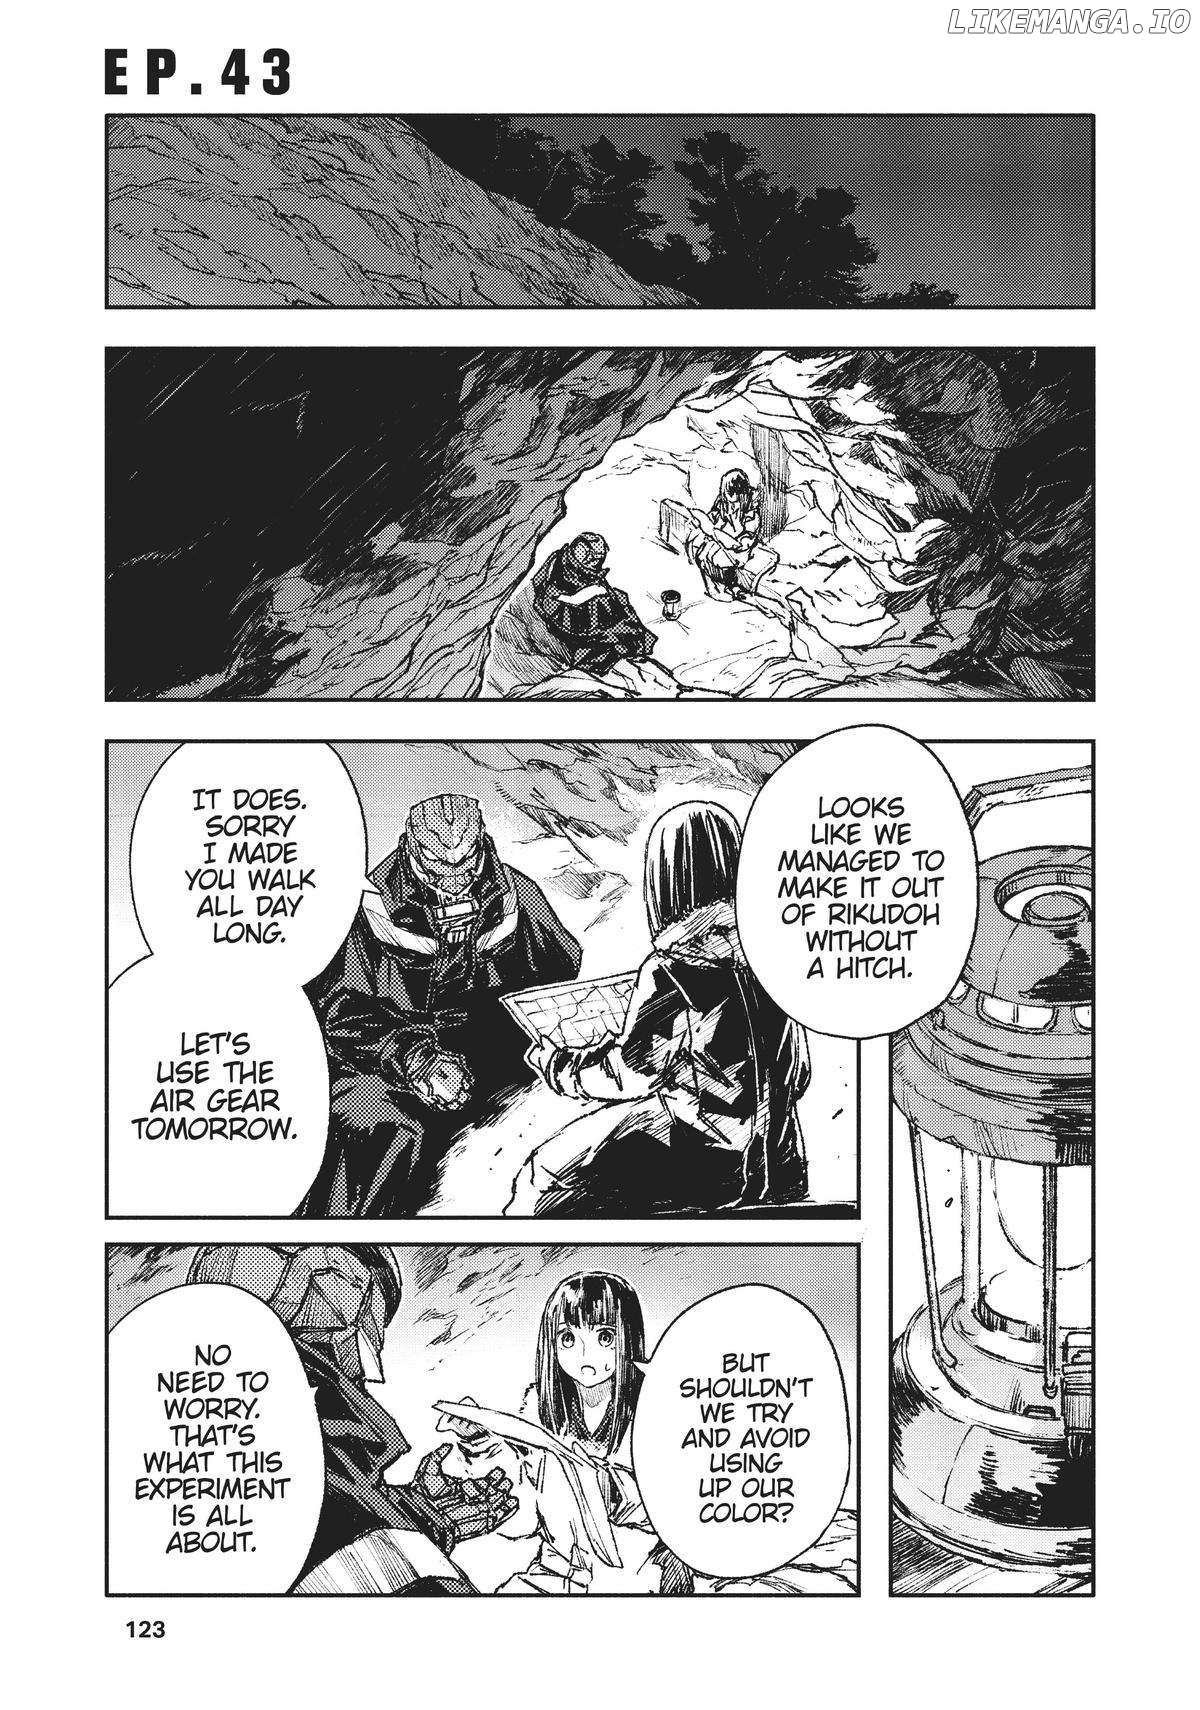 Colorless - Page 2